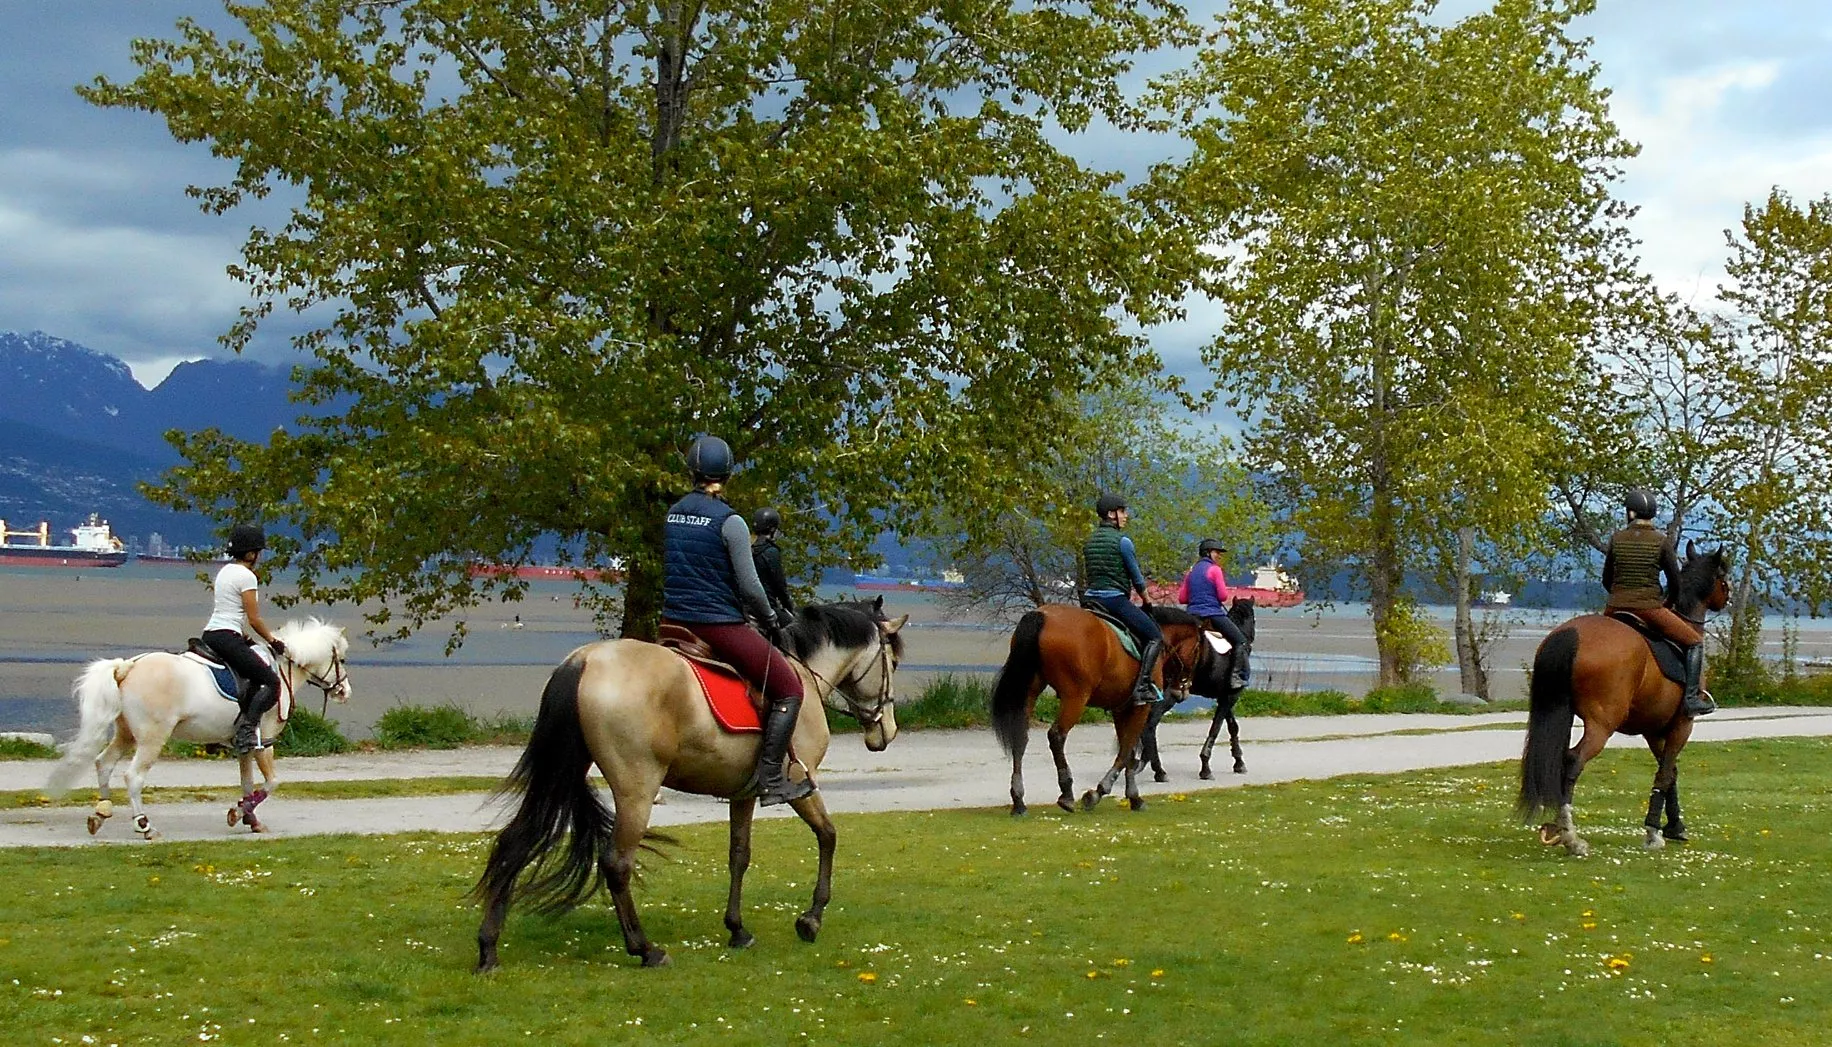 Pinecrest Stables in Canada, North America | Horseback Riding - Rated 0.9